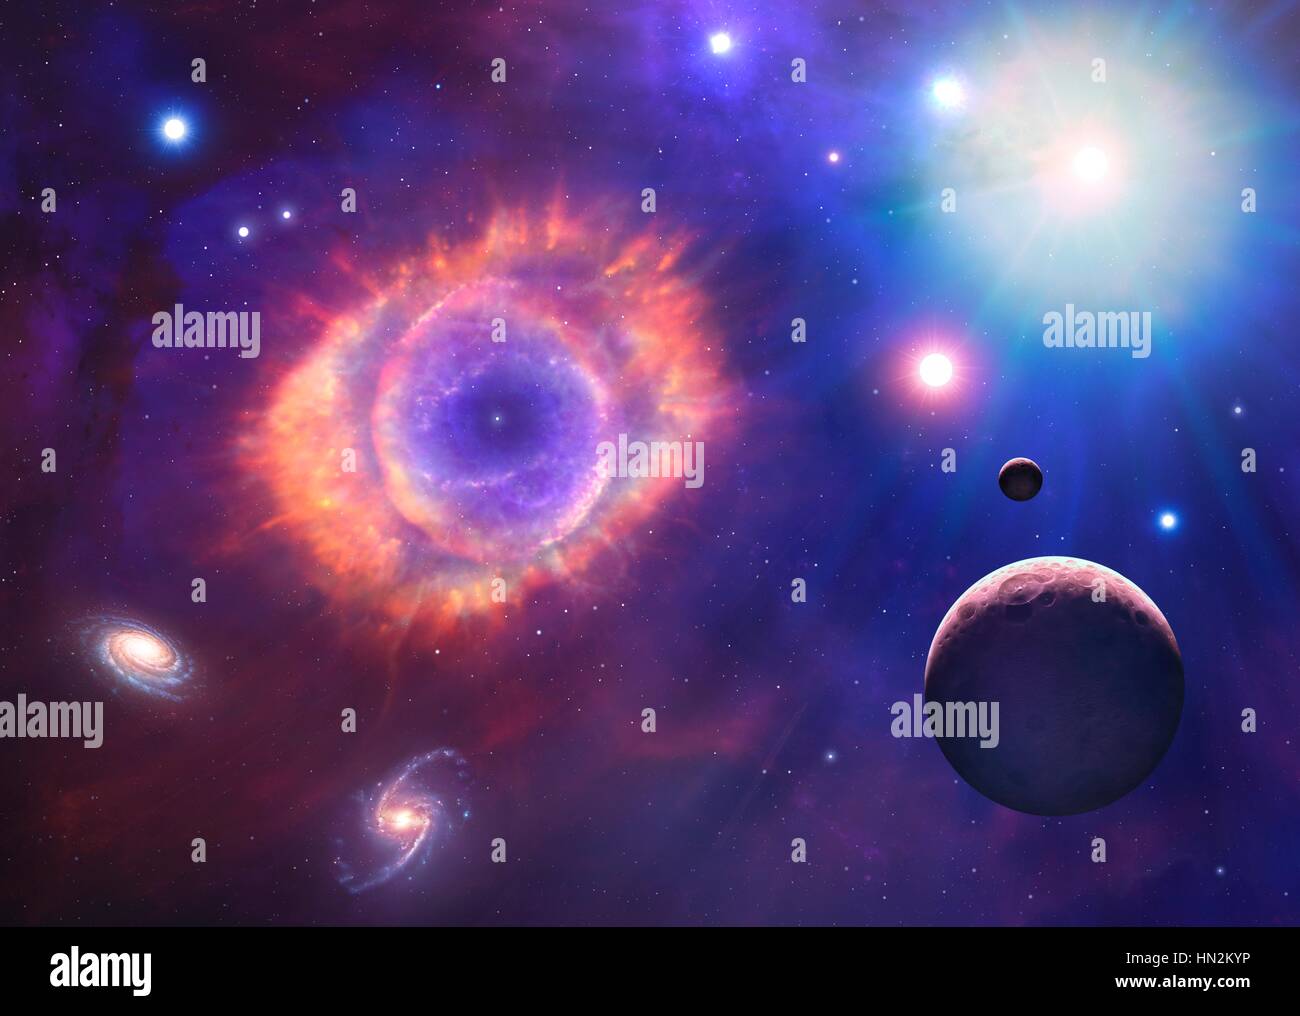 This is a conceptual illustration representing space and astronomy in general. It shows the various objects that can be found in the Universe: planets, moons, stars, nebulae and galaxies. The centrepiece is a planetary nebula the cast-off remains of a dying star. Stock Photo